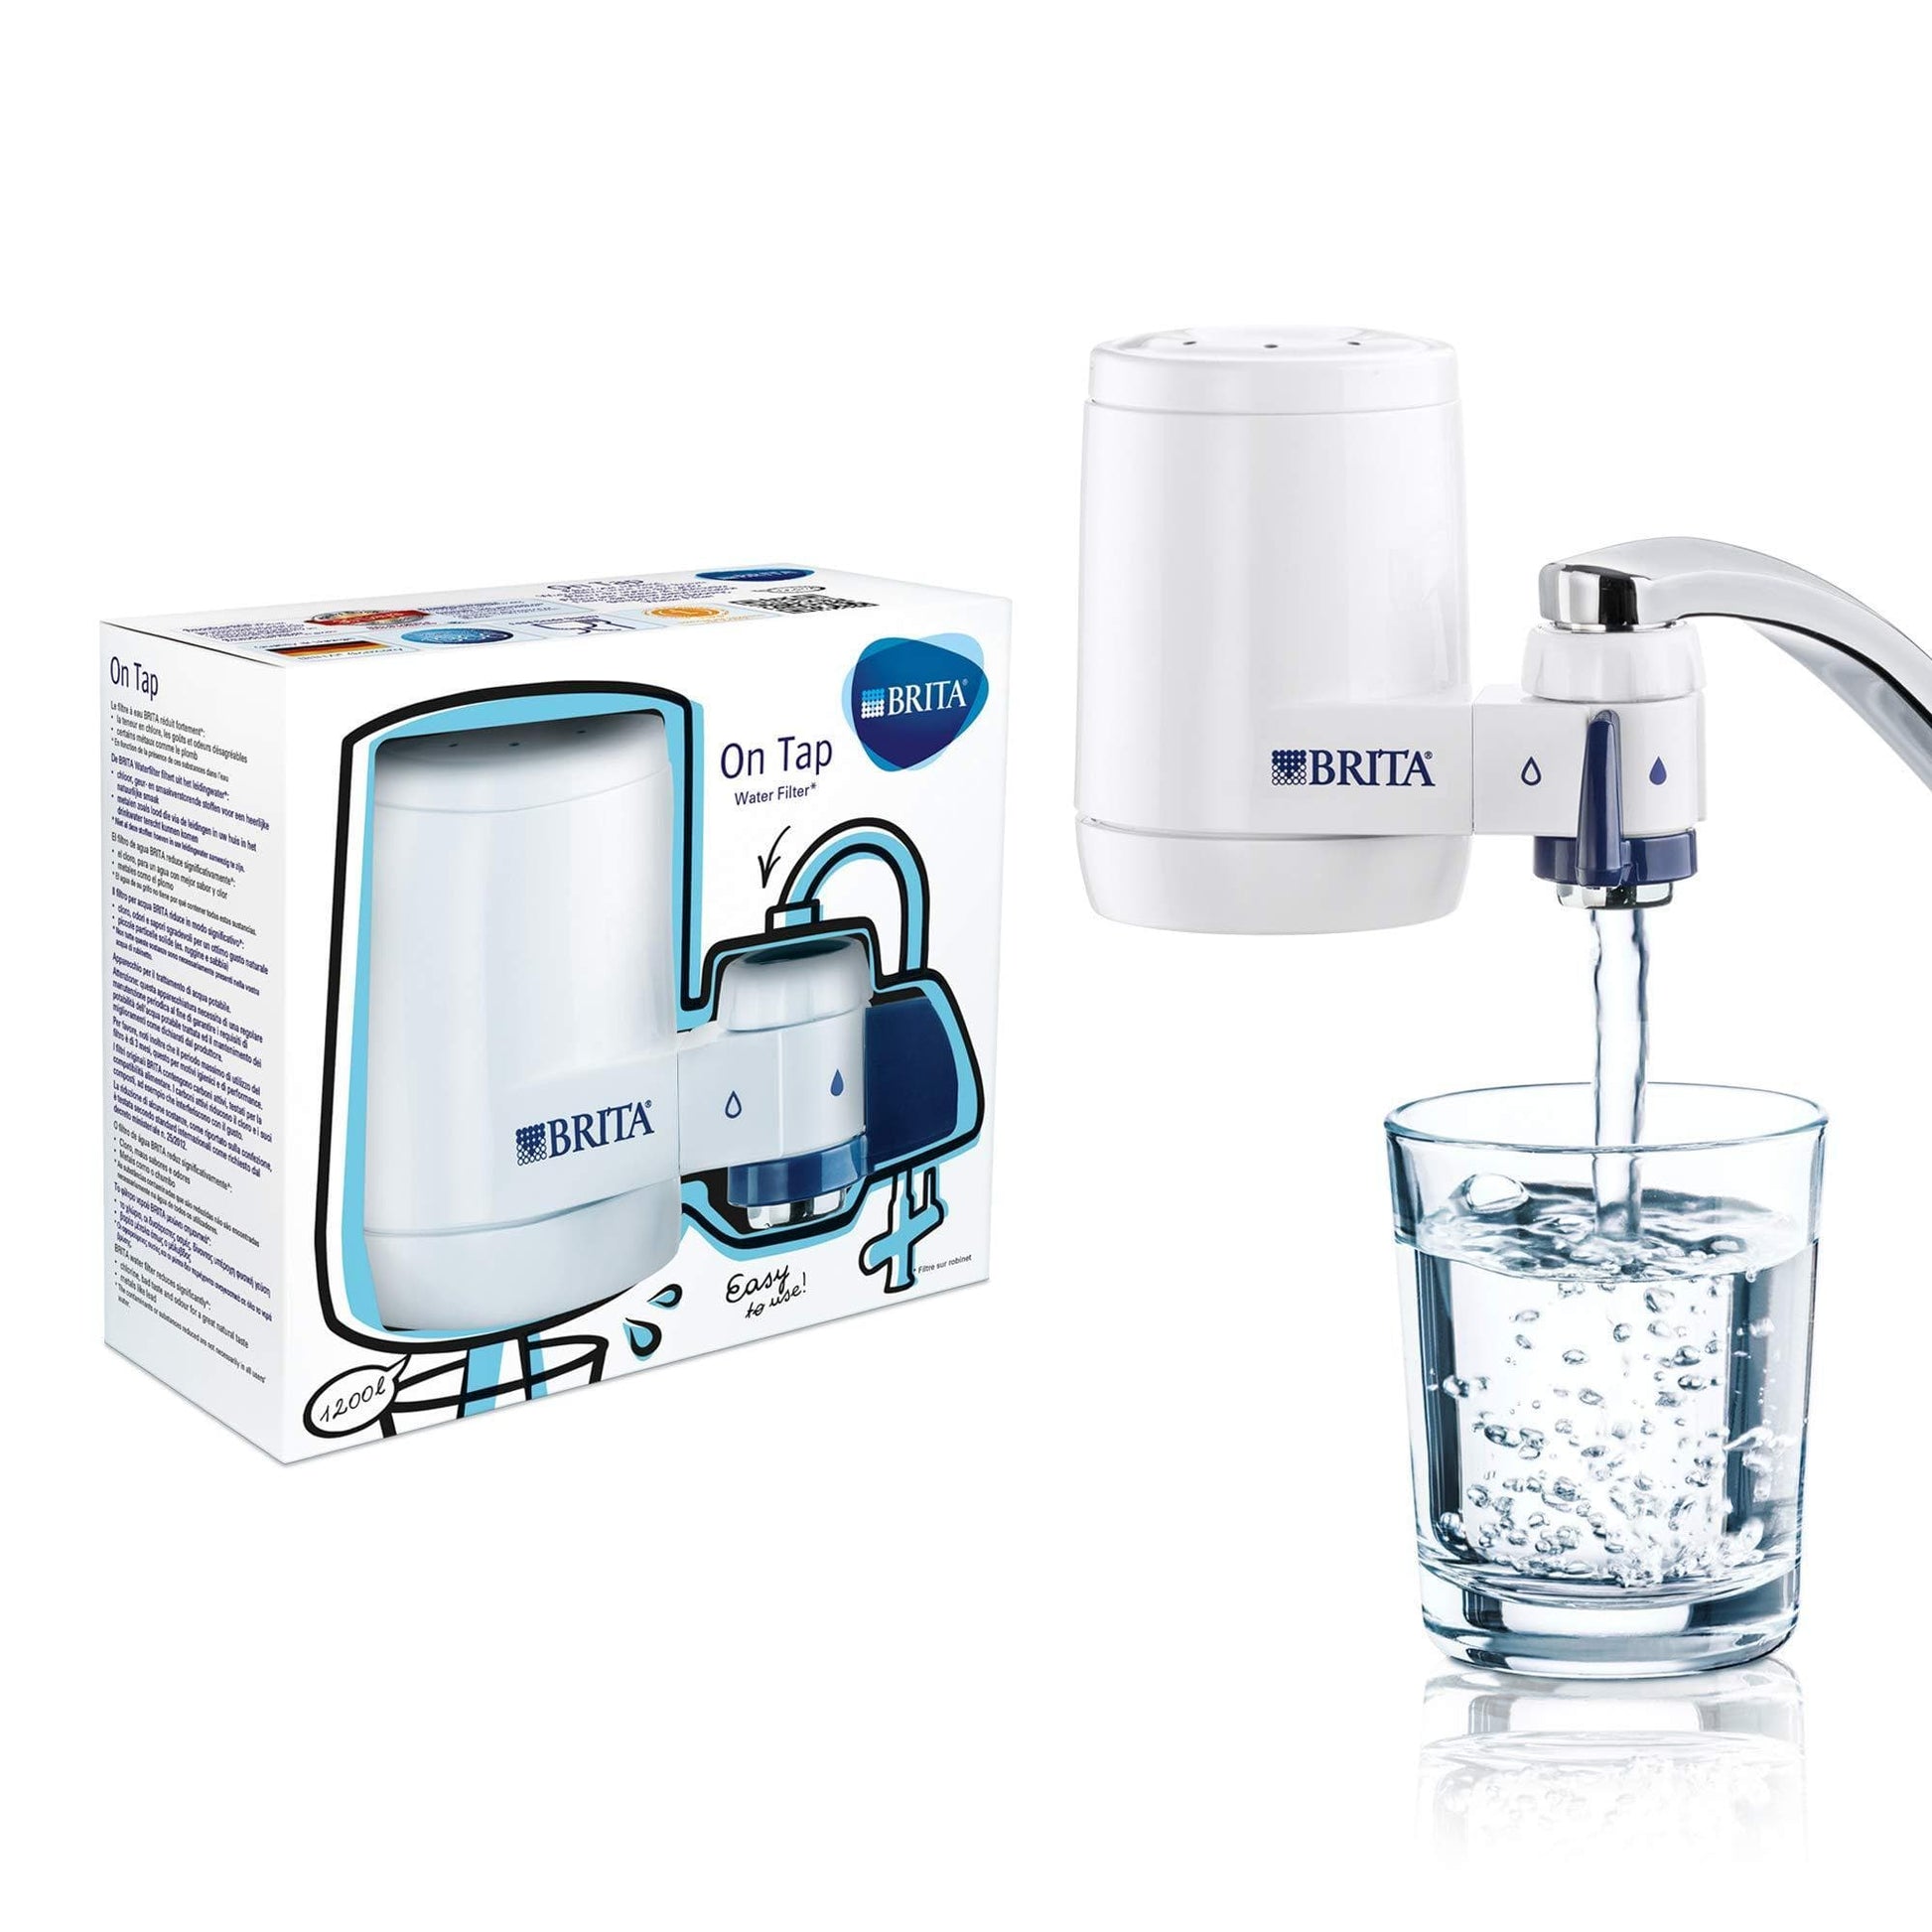 BRITA On Tap Water Filter System (with 1 filter) + 1 fi